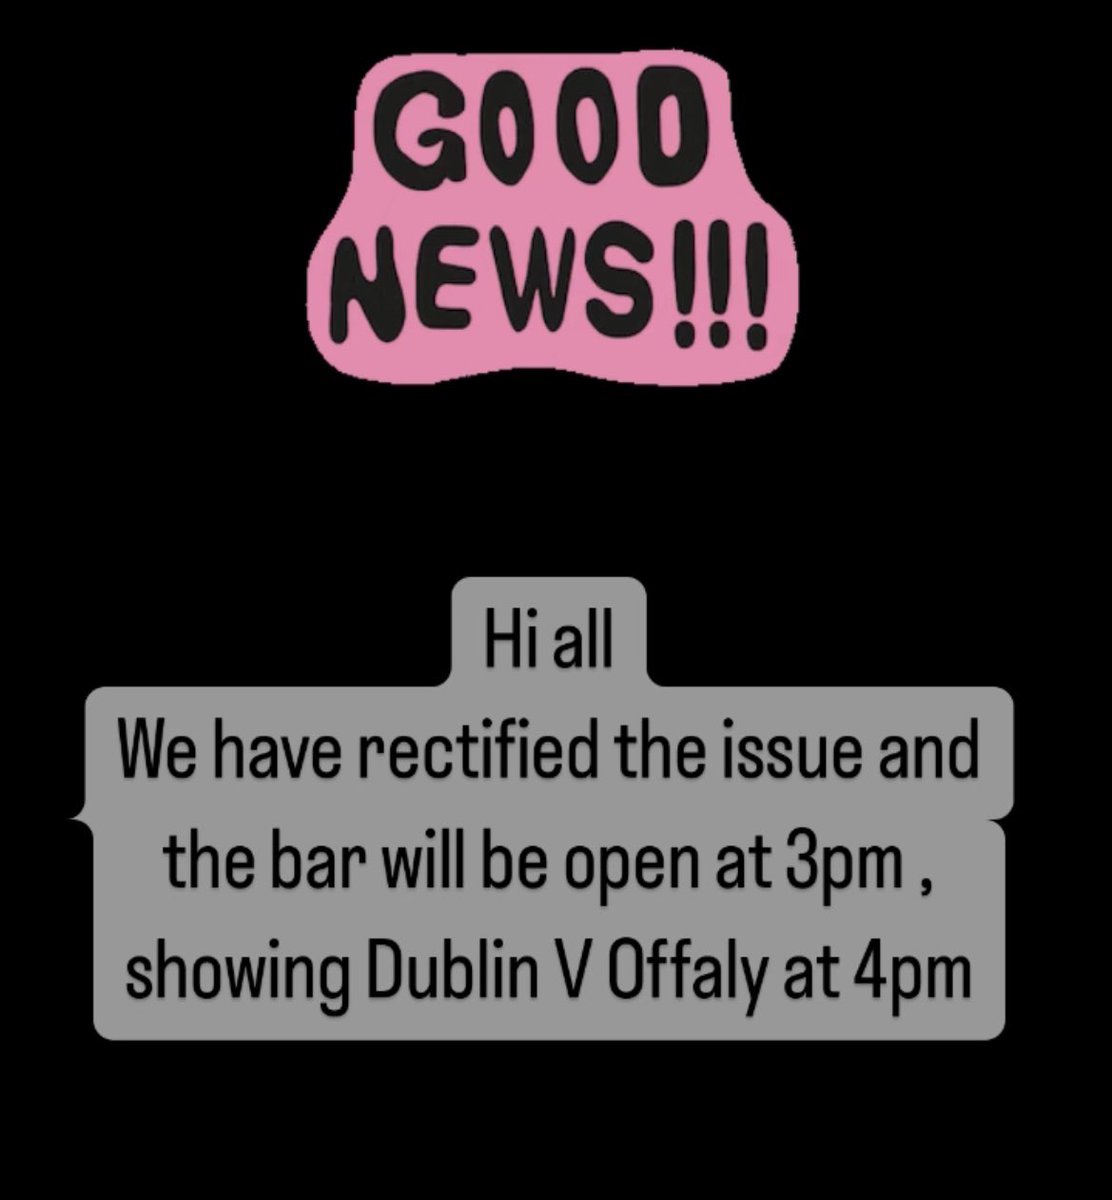 We have rectified the issue and the bar will now open at 3pm, showing Dublin V Offaly at 4pm